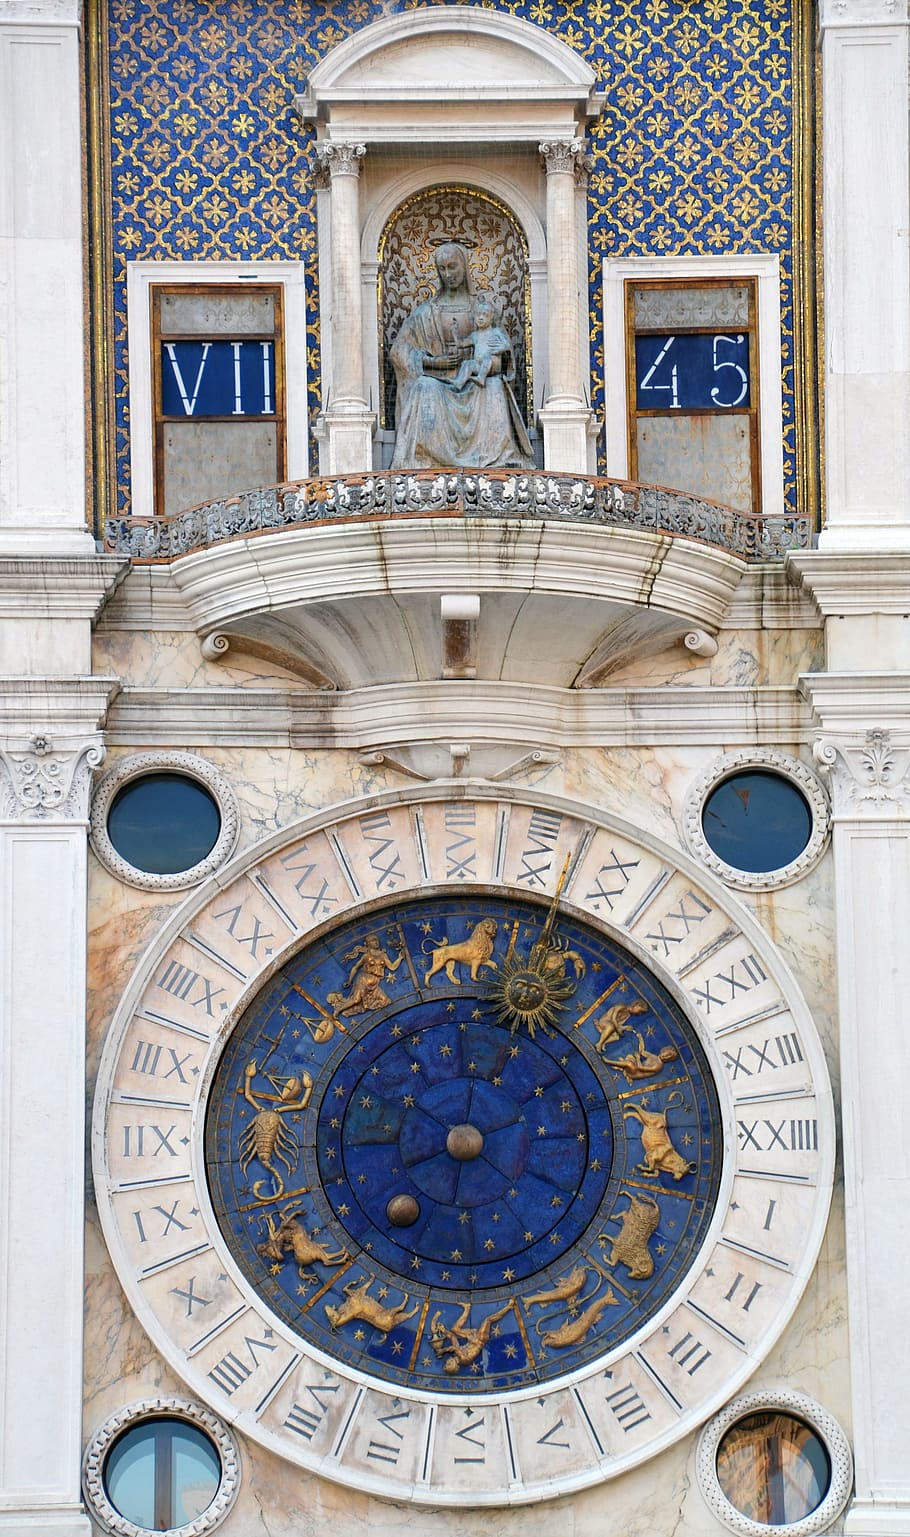 blue and white zodiac sign building, time, clock, astrology, venice